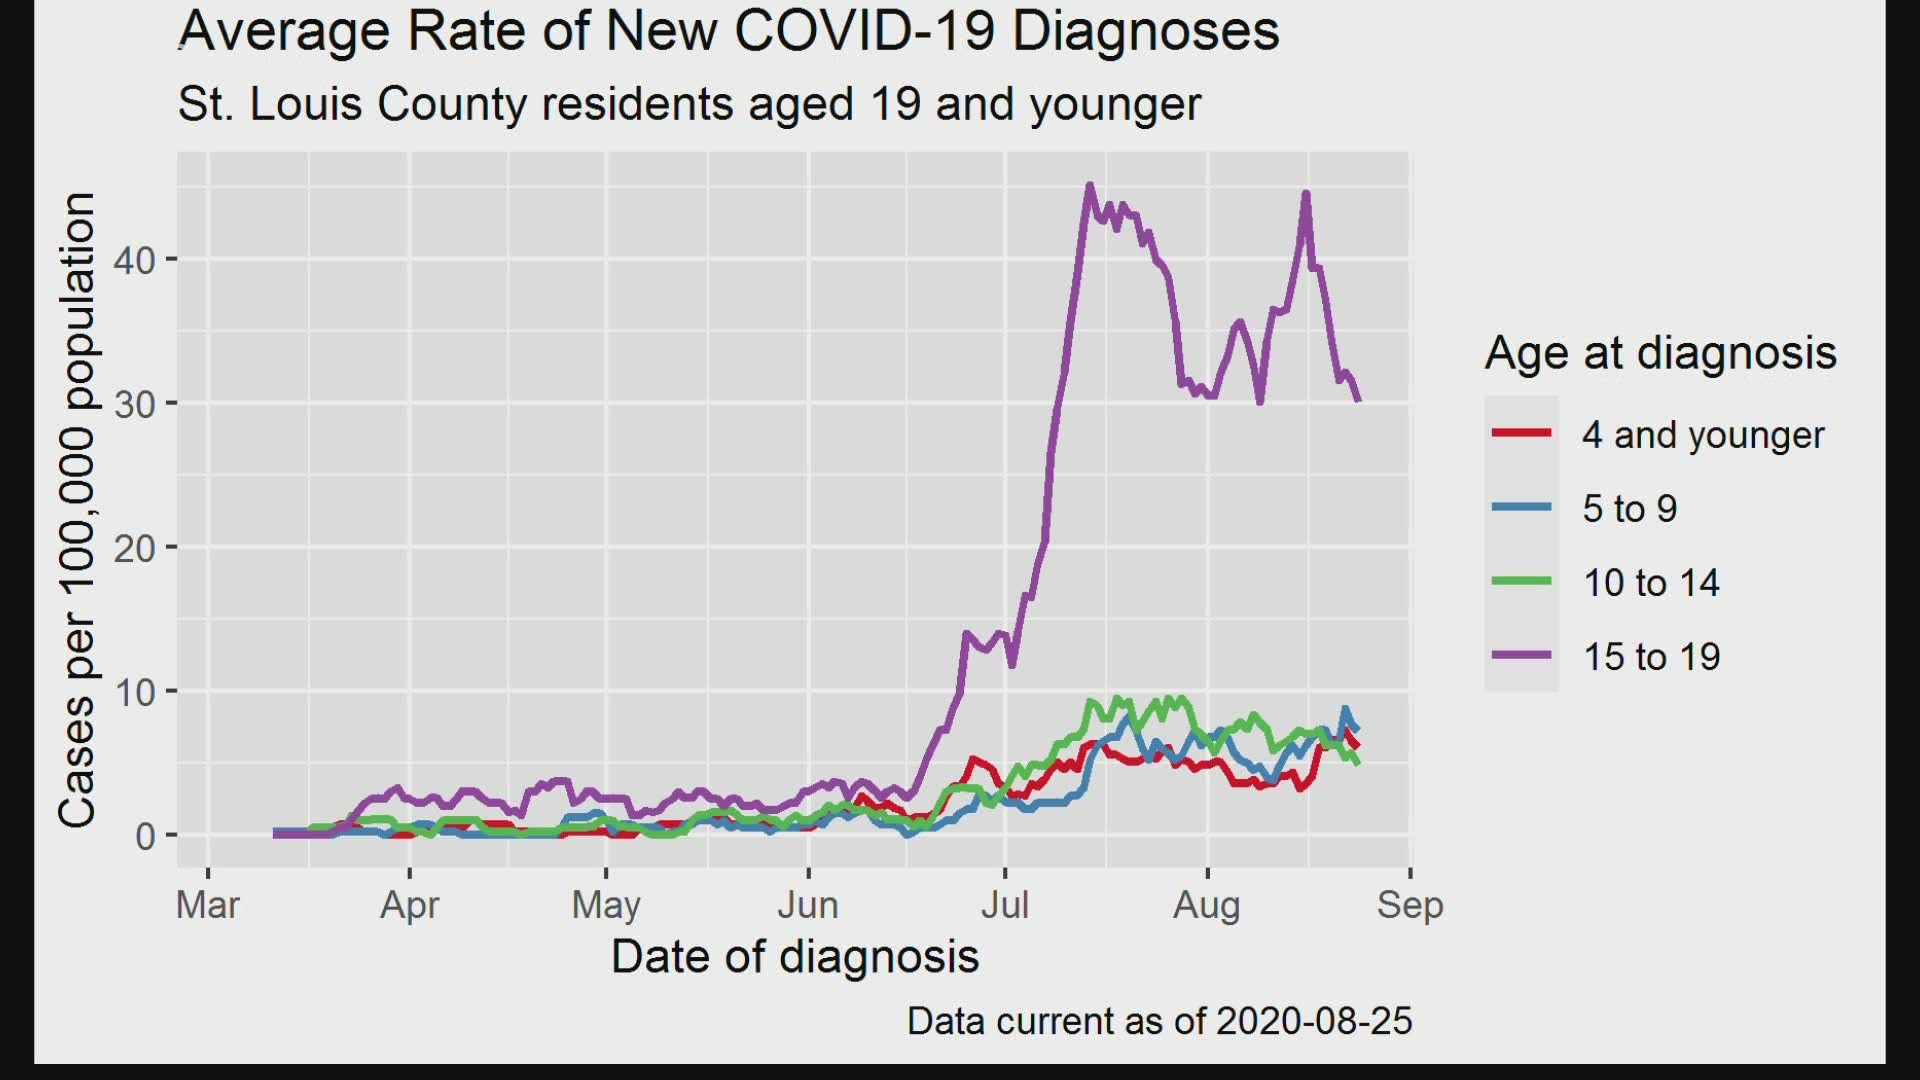 On Wednesday, the task force reported 71 new COVID-19 patients, the most in a single day since hospitals started tracking